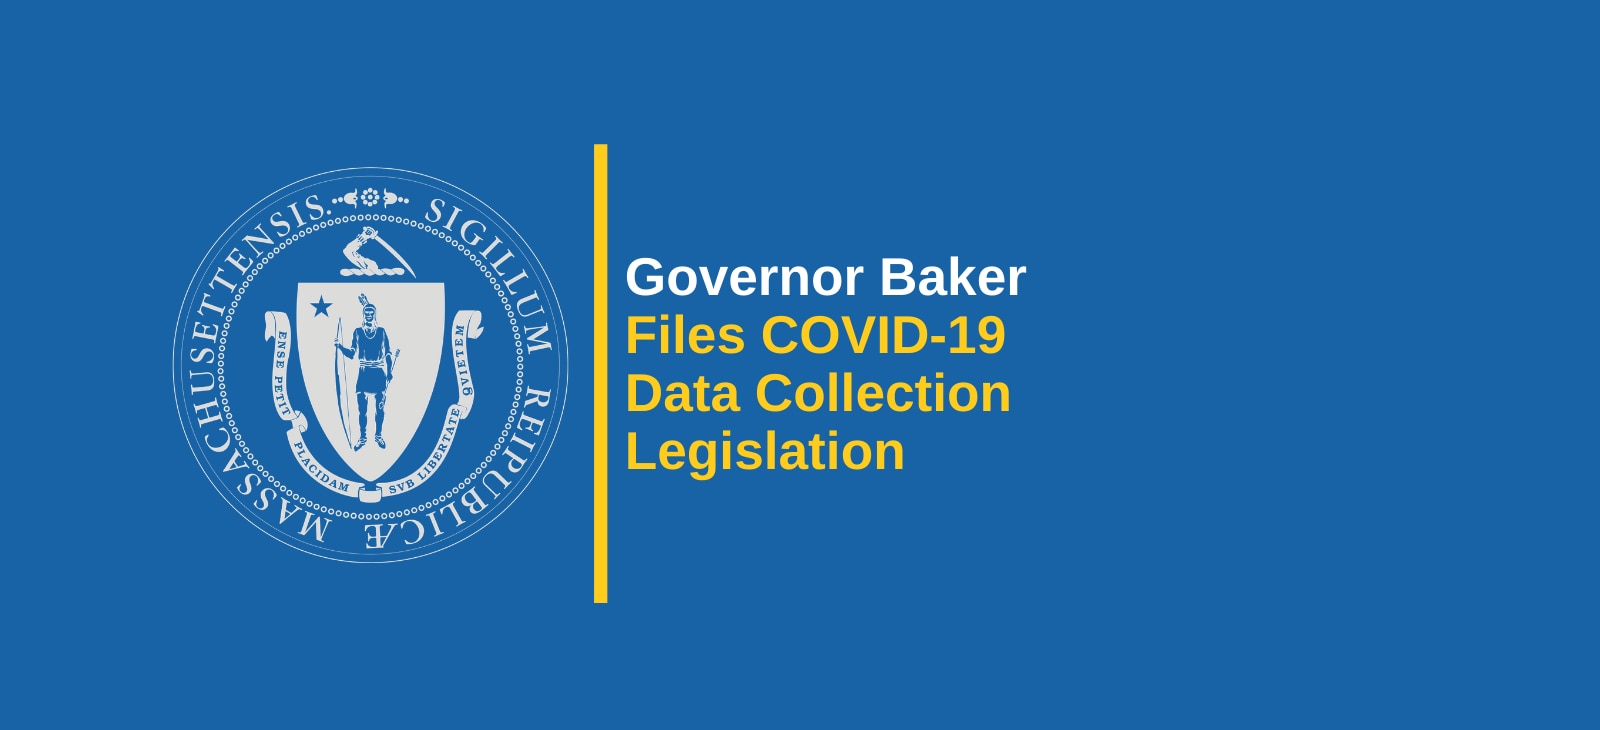 Governor Baker Files COVID-19 Data Collection Bill